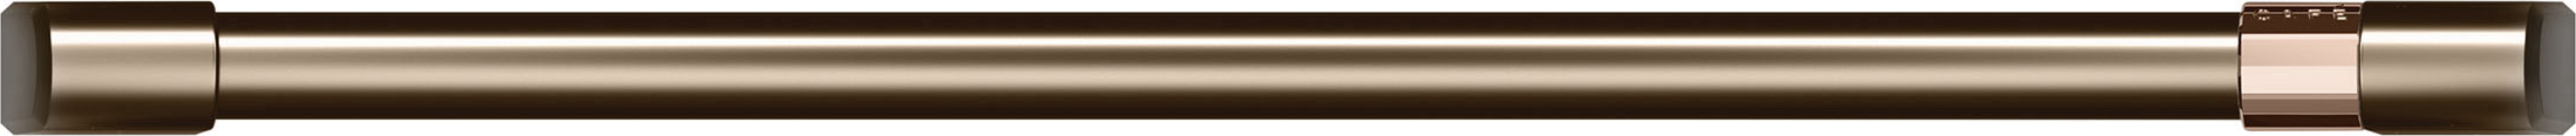 Cafe30" Single Wall Oven Handle - Brushed Bronze